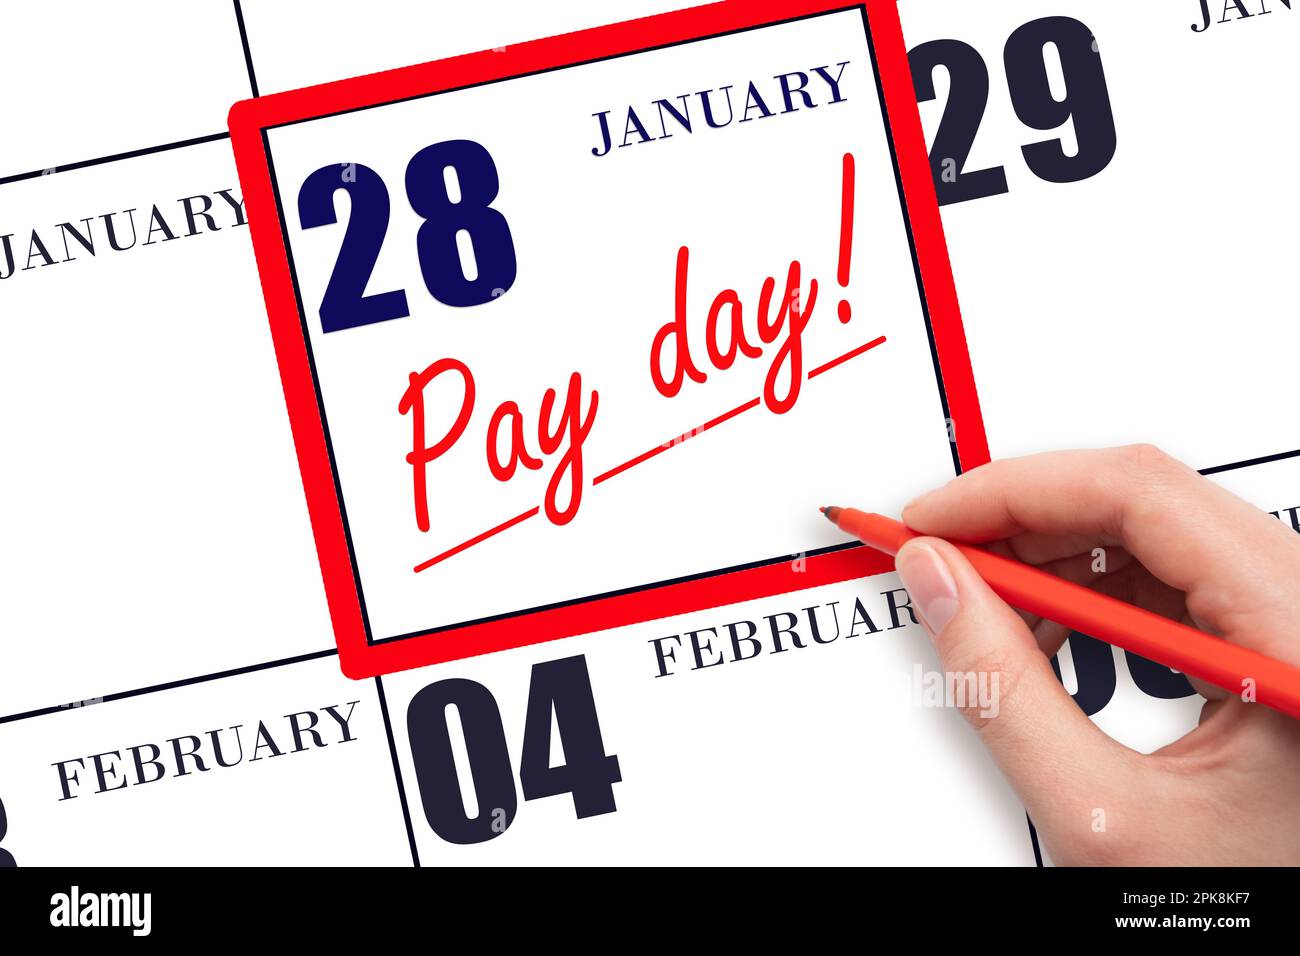 28th day of January. Hand writing text PAY DATE on calendar date January 28 and underline it. Payment due date. Reminder concept of payment. Winter mo Stock Photo